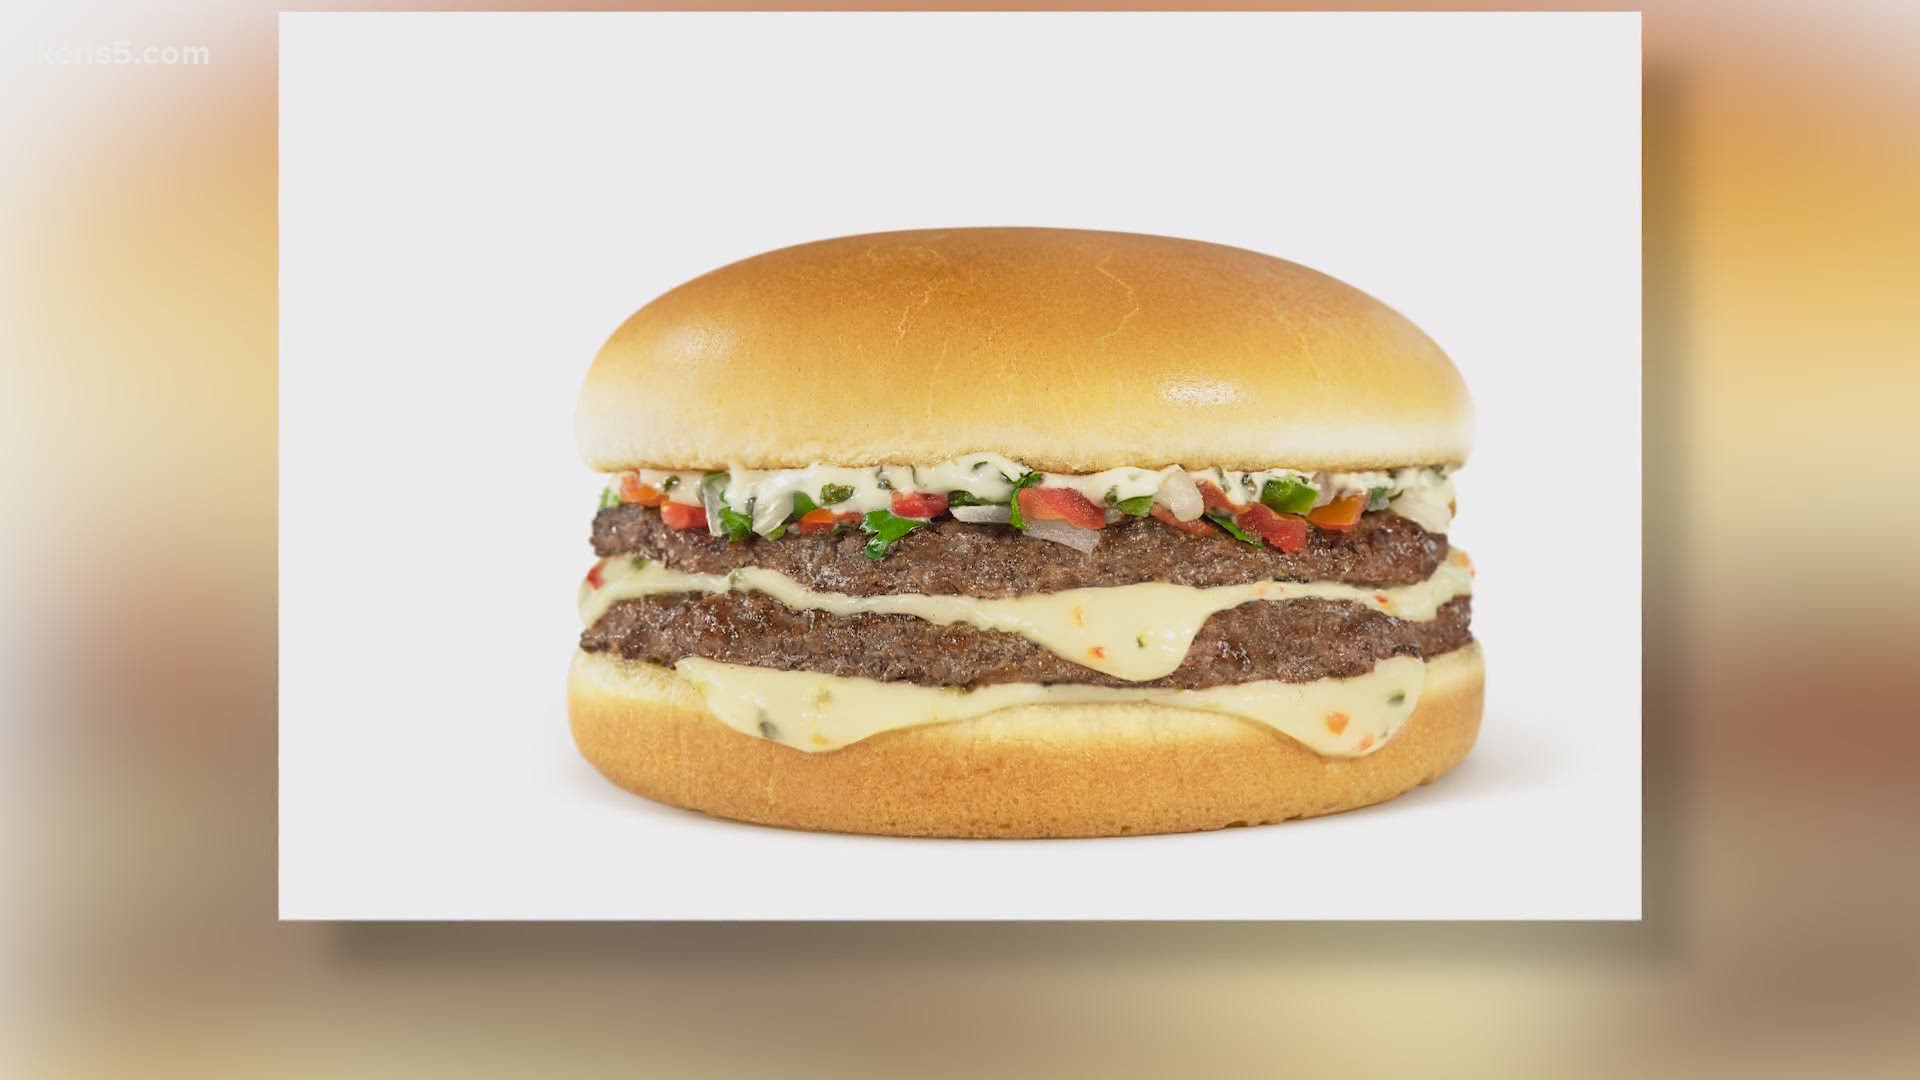 Whataburger has a new burger with pico de gallo, pepper jack cheese and new cilantro lime sauce. We'll take seven.